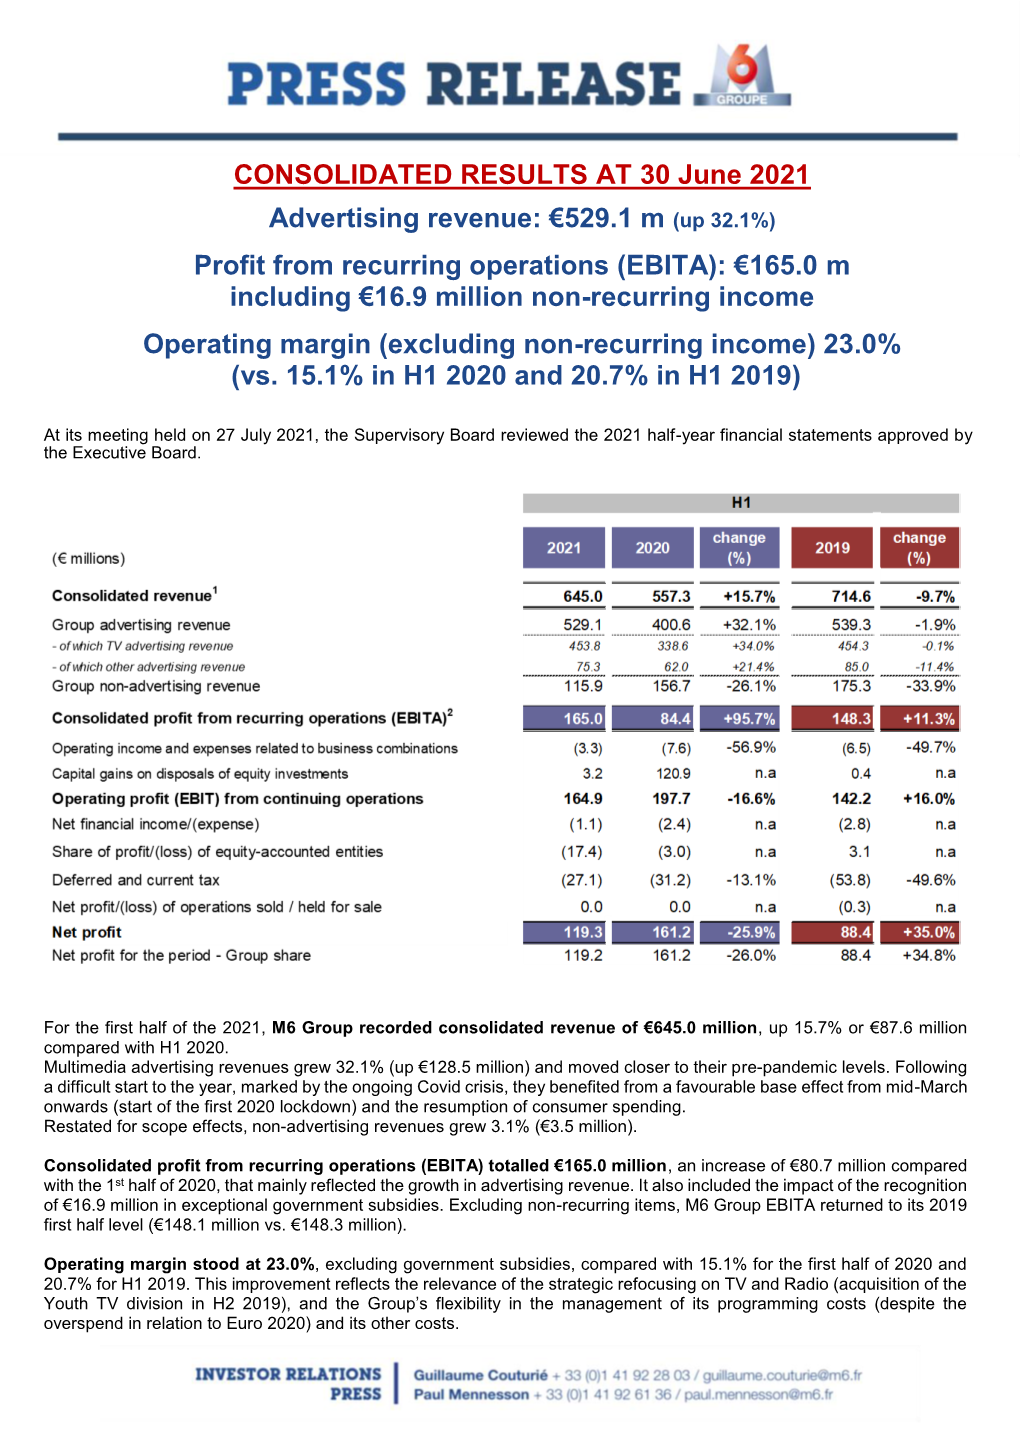 CONSOLIDATED RESULTS at 30 June 2021 Advertising